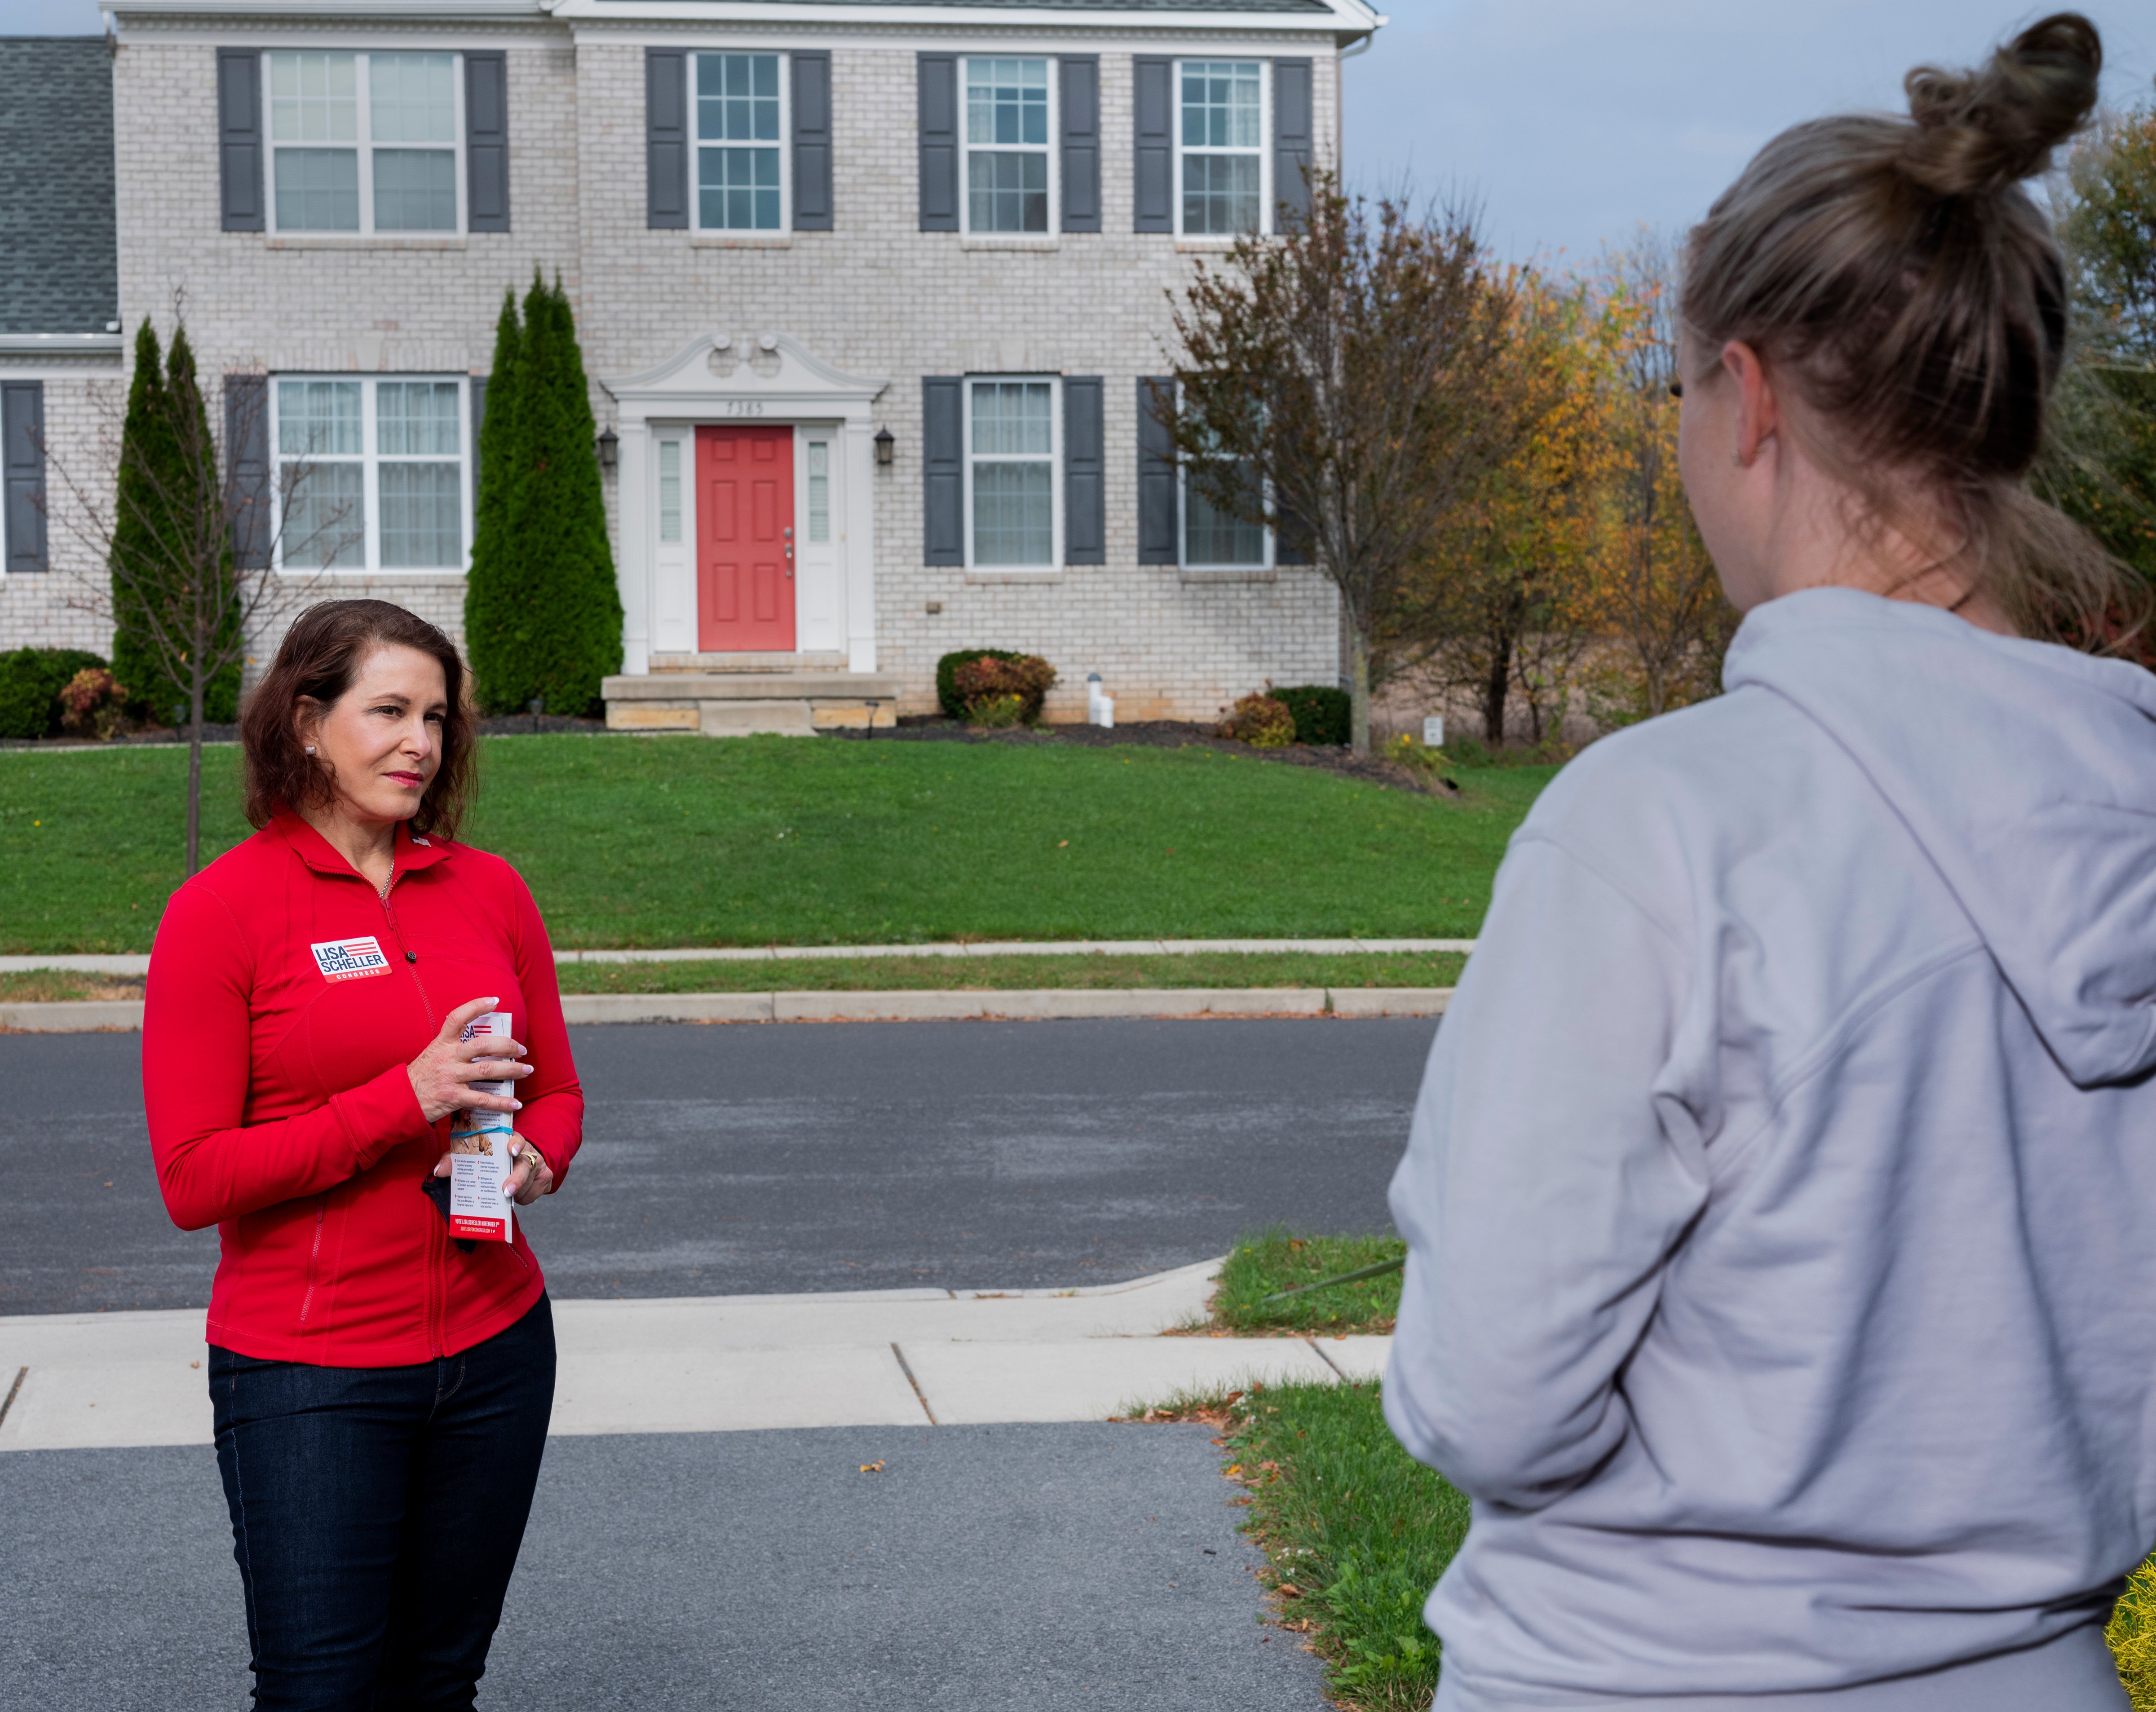 Republican nominee, Lisa Scheller, speaks with a resident while canvasing in Allentown, Pa., on Oct. 24, 2020. (Elizabeth Bick for TIME)